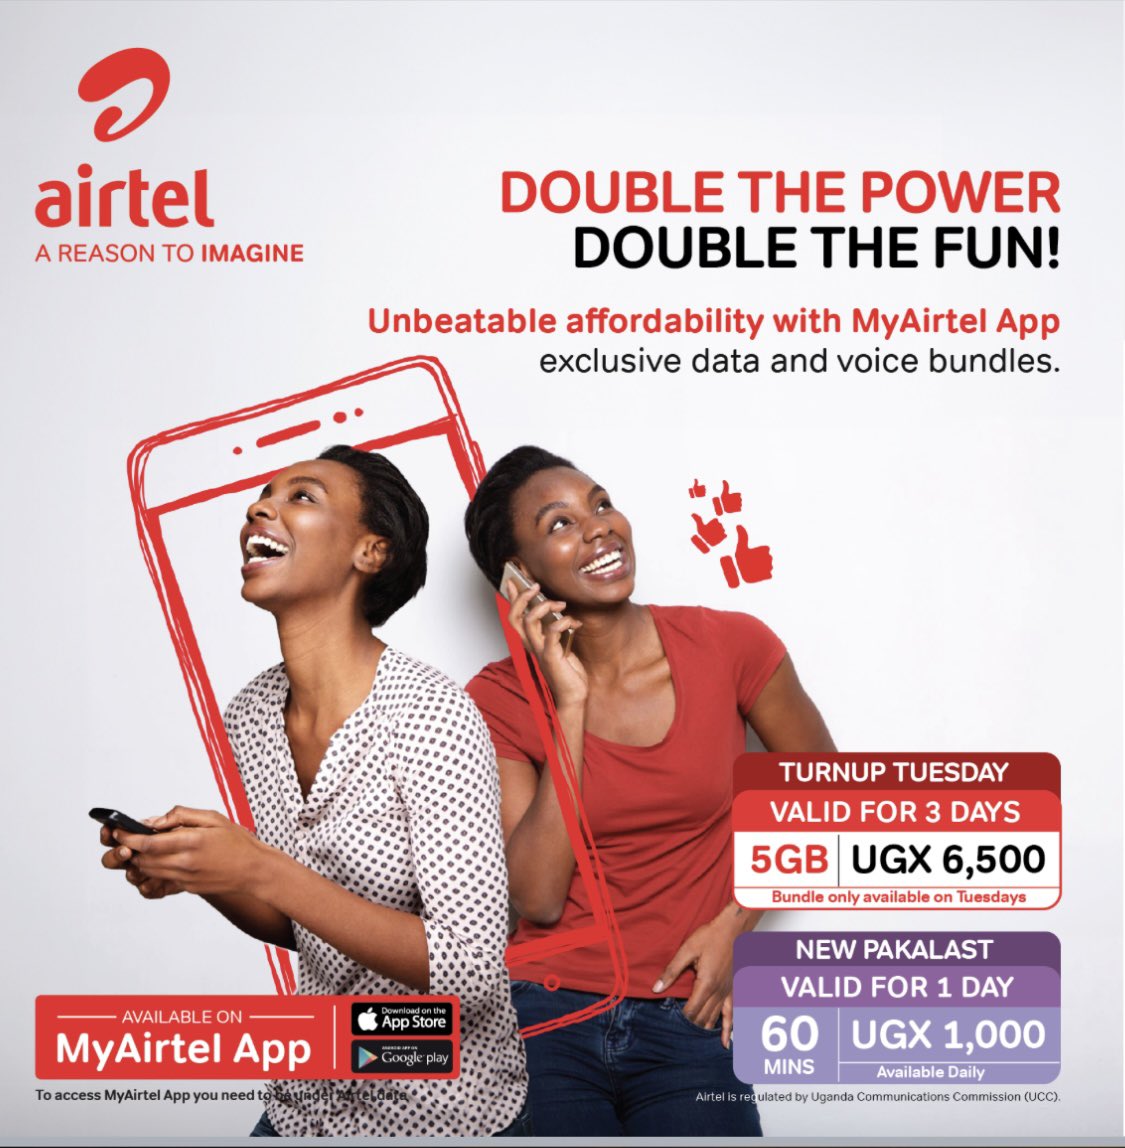 Call your friends Pakalast with no worries of being cut off!  With our new pakalast bundle exclusive on #MyAirtelApp; airtelafrica.onelink.me/cGyr/qgj4qeu2